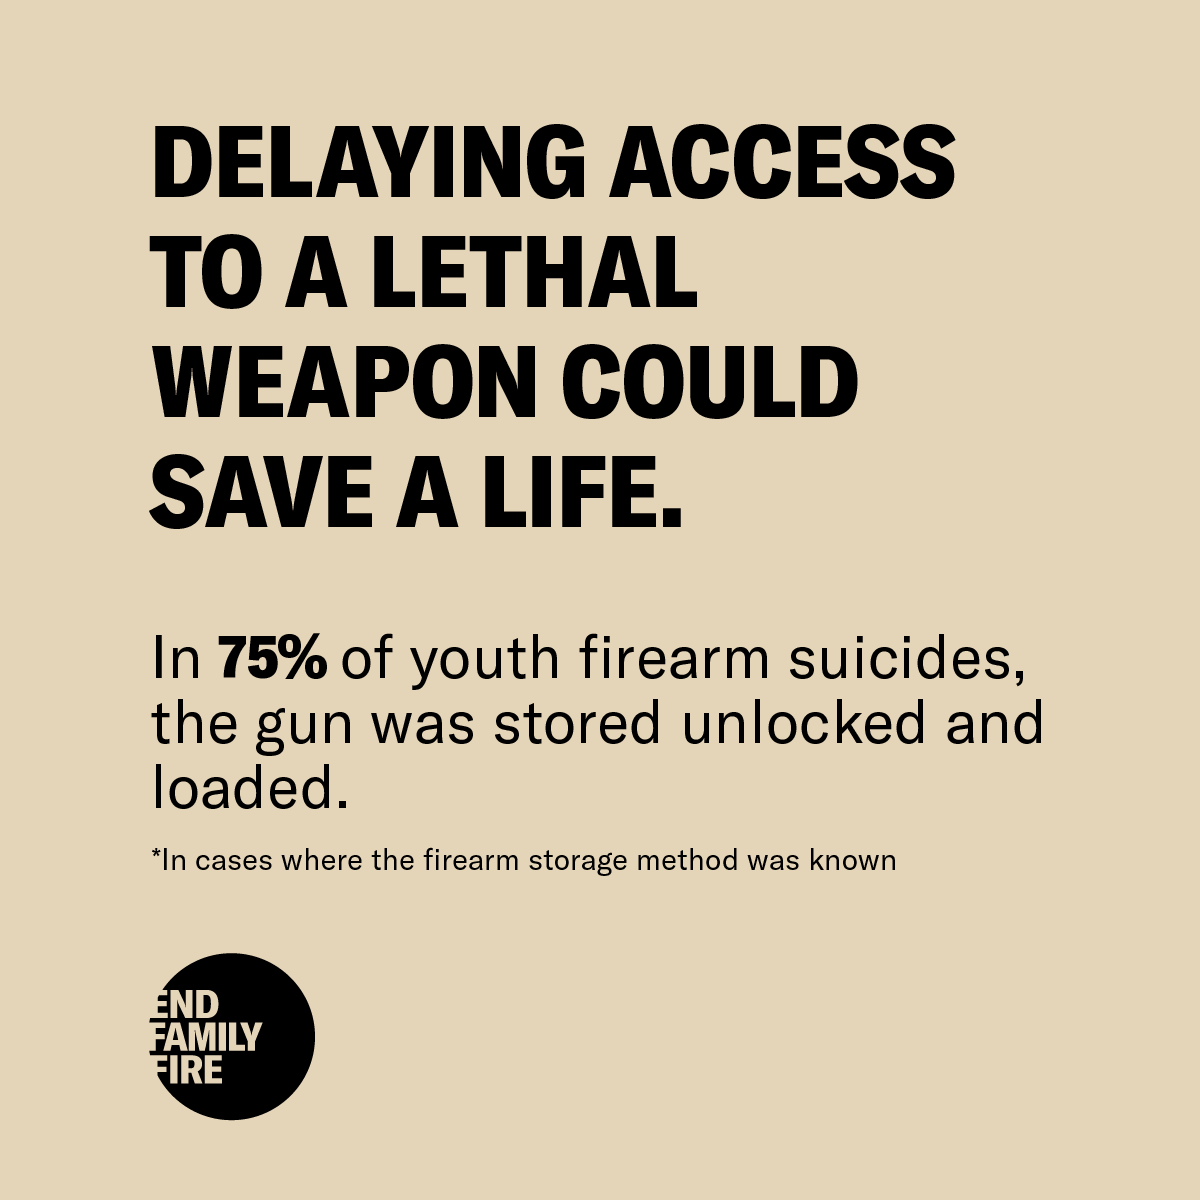 Storing your gun locked, unloaded, away from ammo, and inaccessible to children reduces the risk of family fire by 73%. These life-saving measures help prevent unintentional shootings and gun suicides. Learn more at endfamilyfire.org